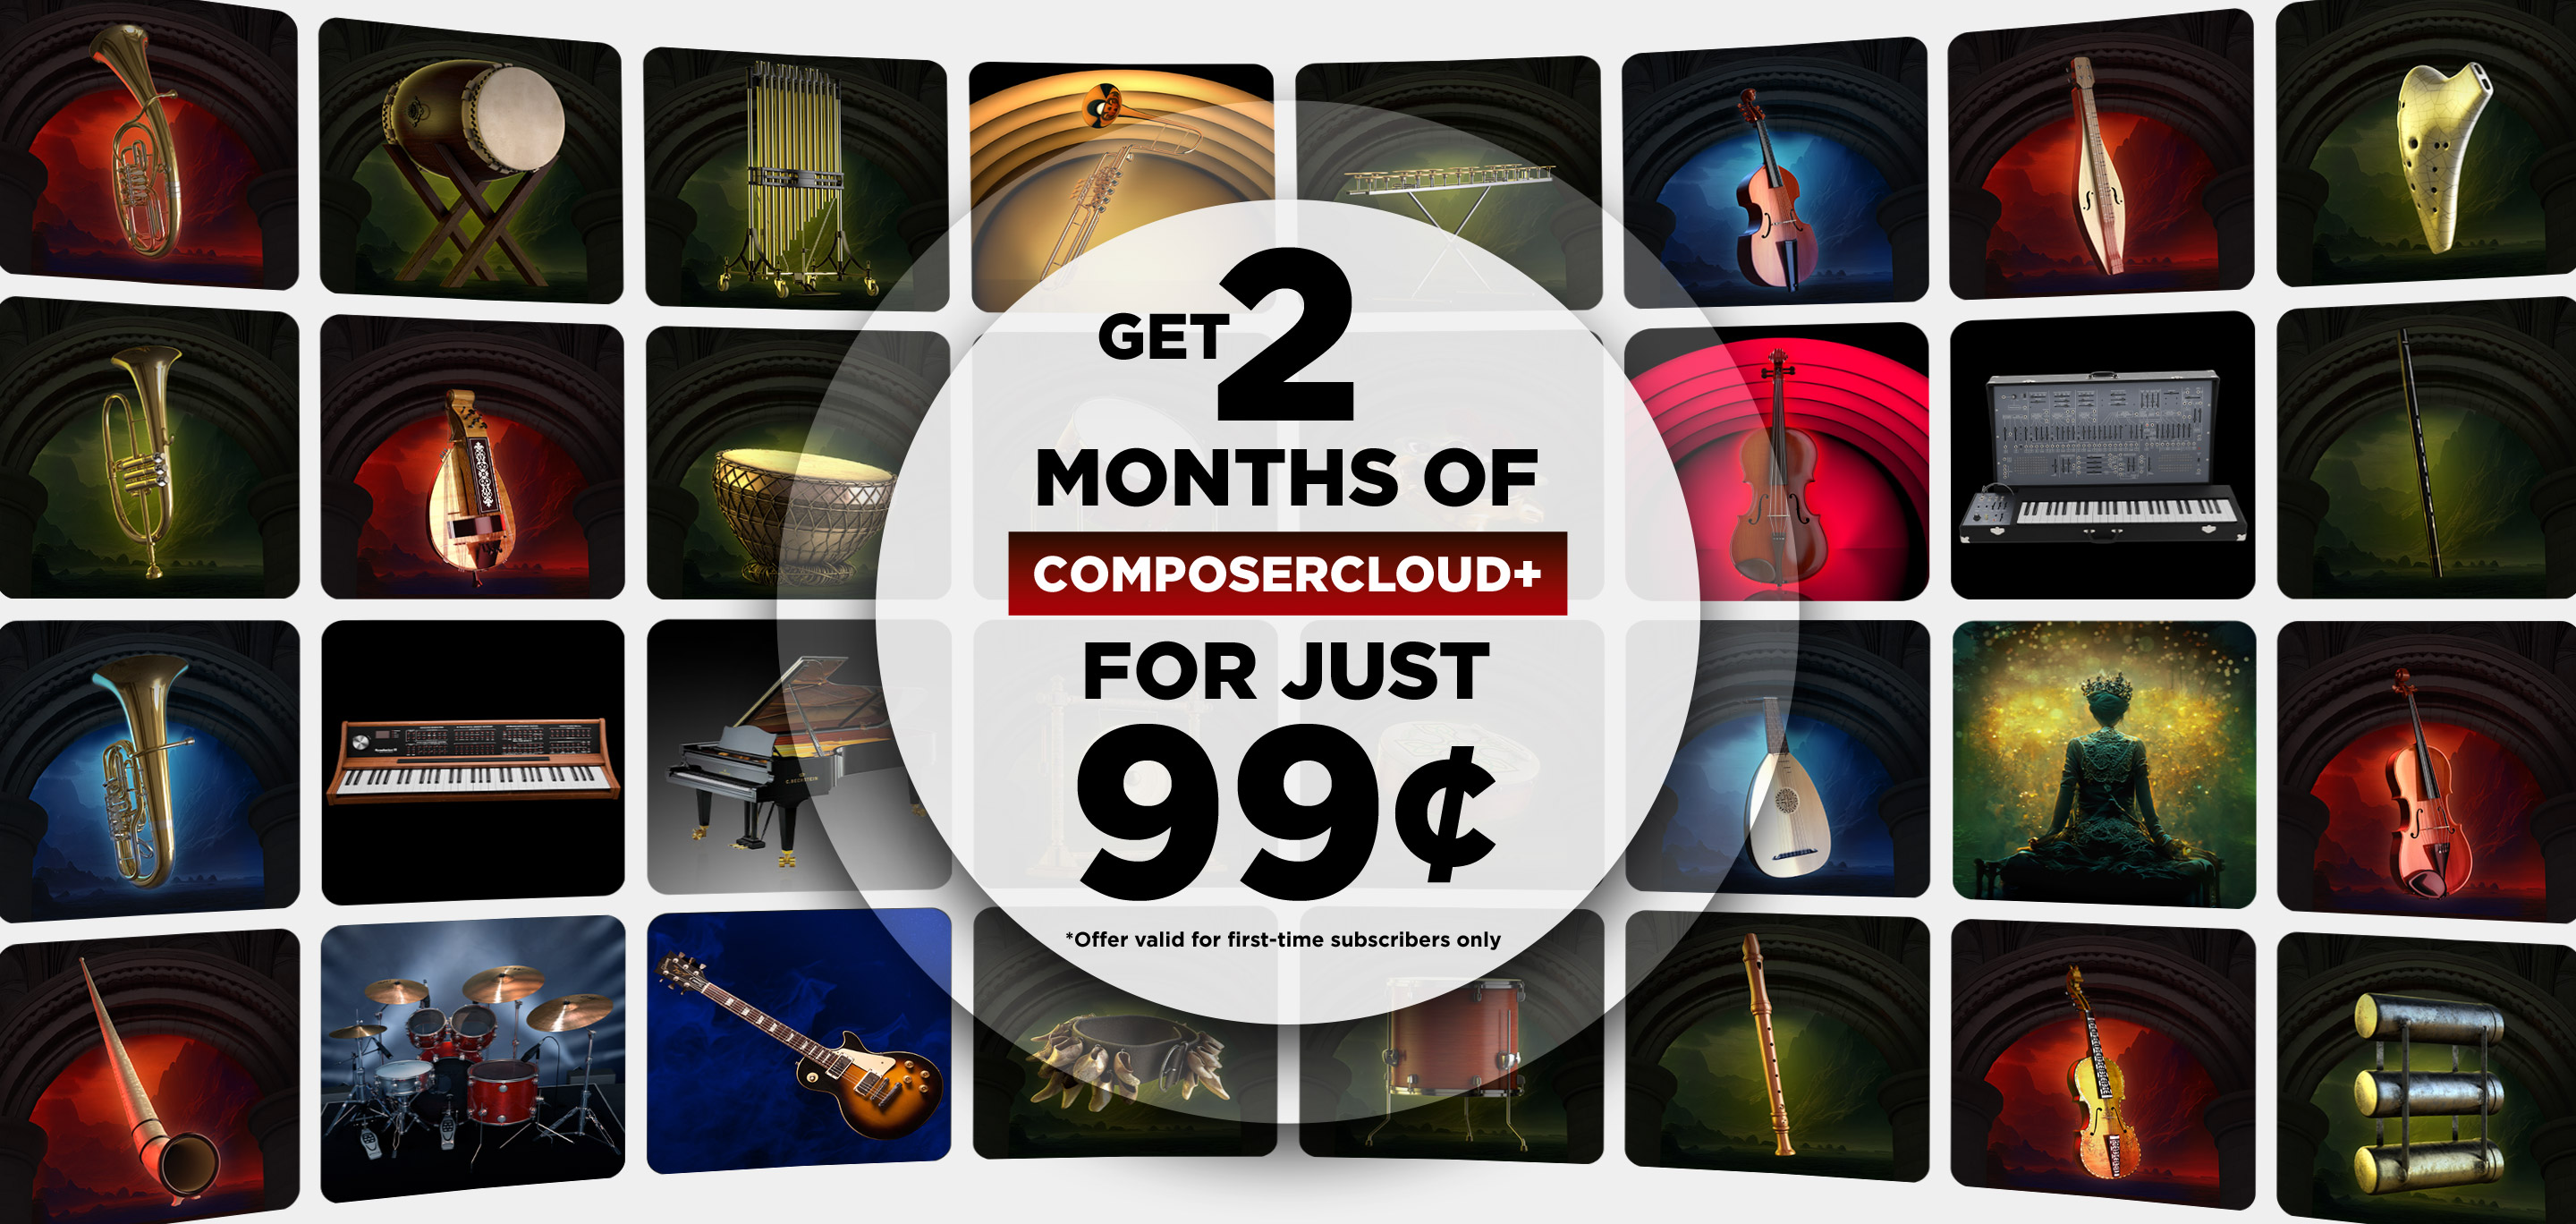 EastWest ComposerCloud - Get 2 Months of ComposerCloud+ for just 99 Cents